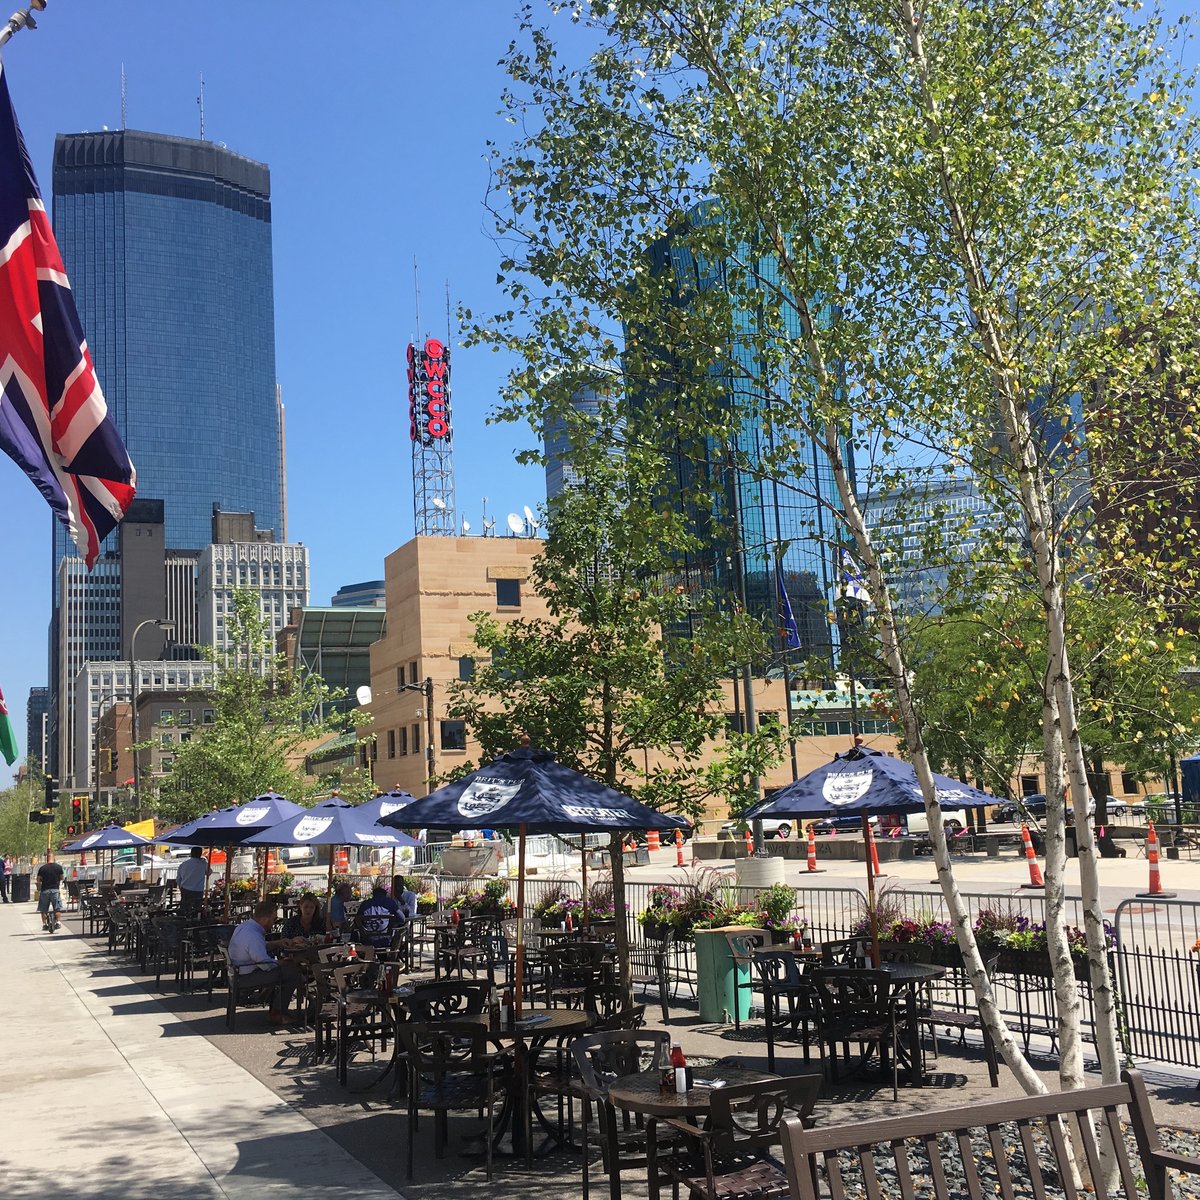 Edina Restaurant Featured In List Of Best Patios In Twin Cities